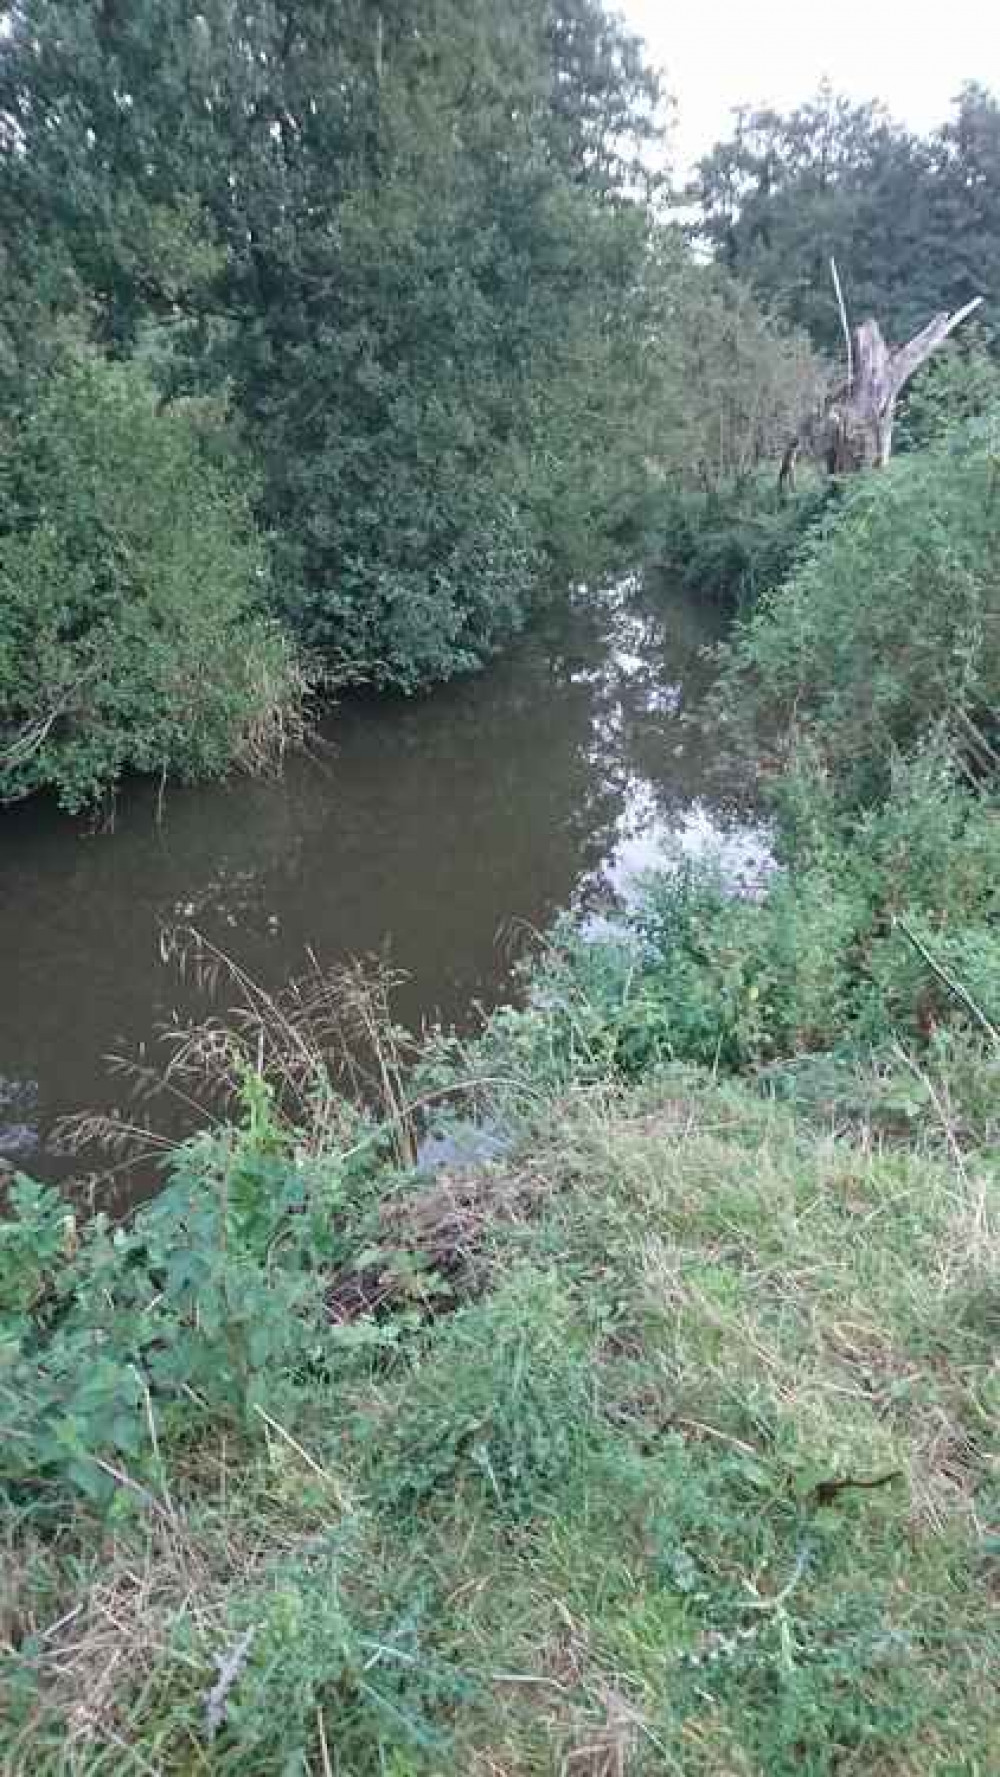 River Frome showing results of pollution back in August 2020